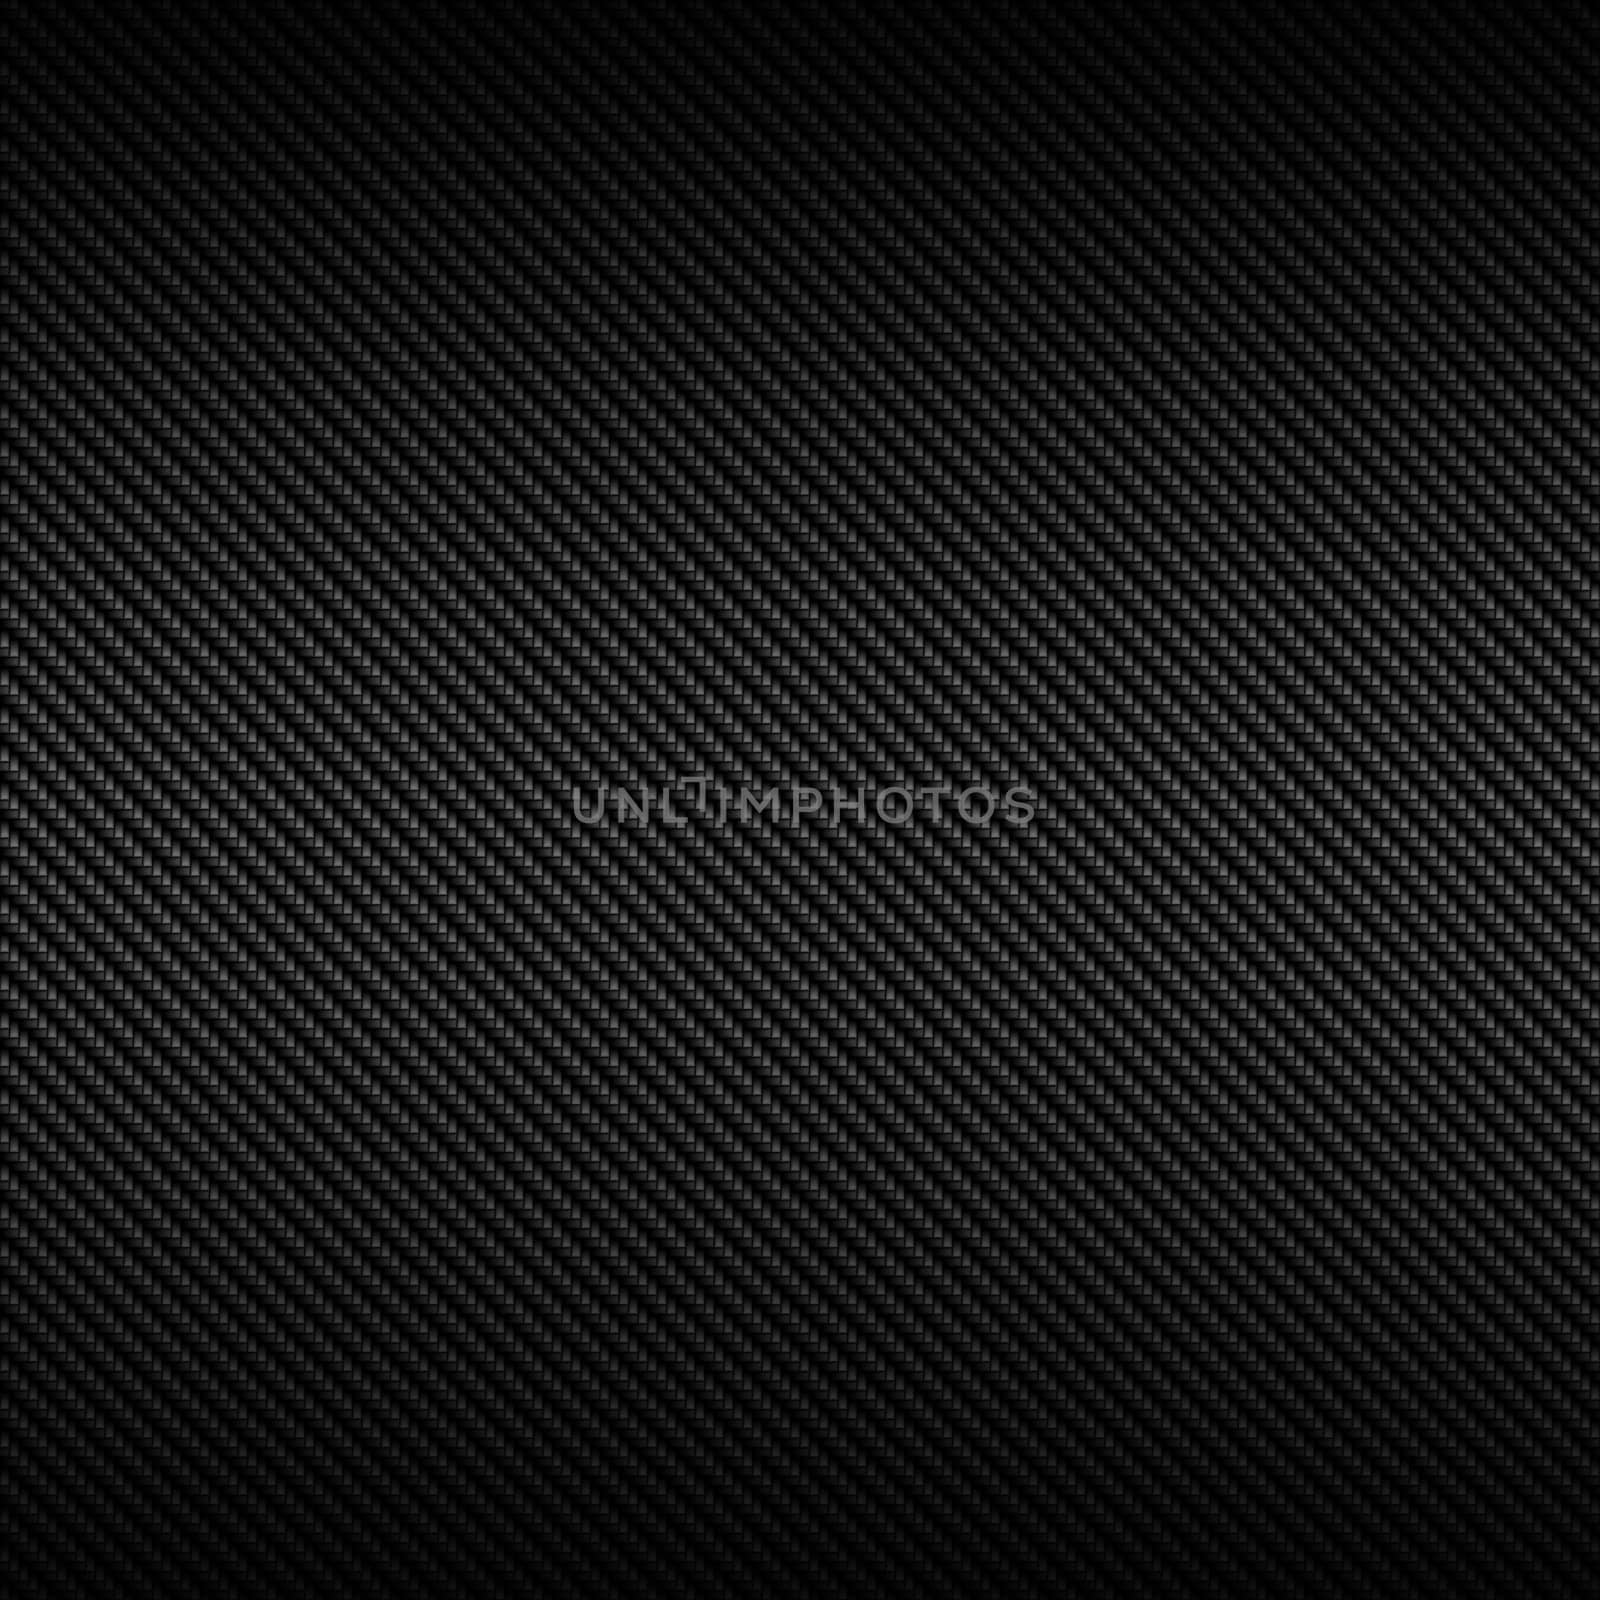 Black Carbon Fiber Texture by graficallyminded